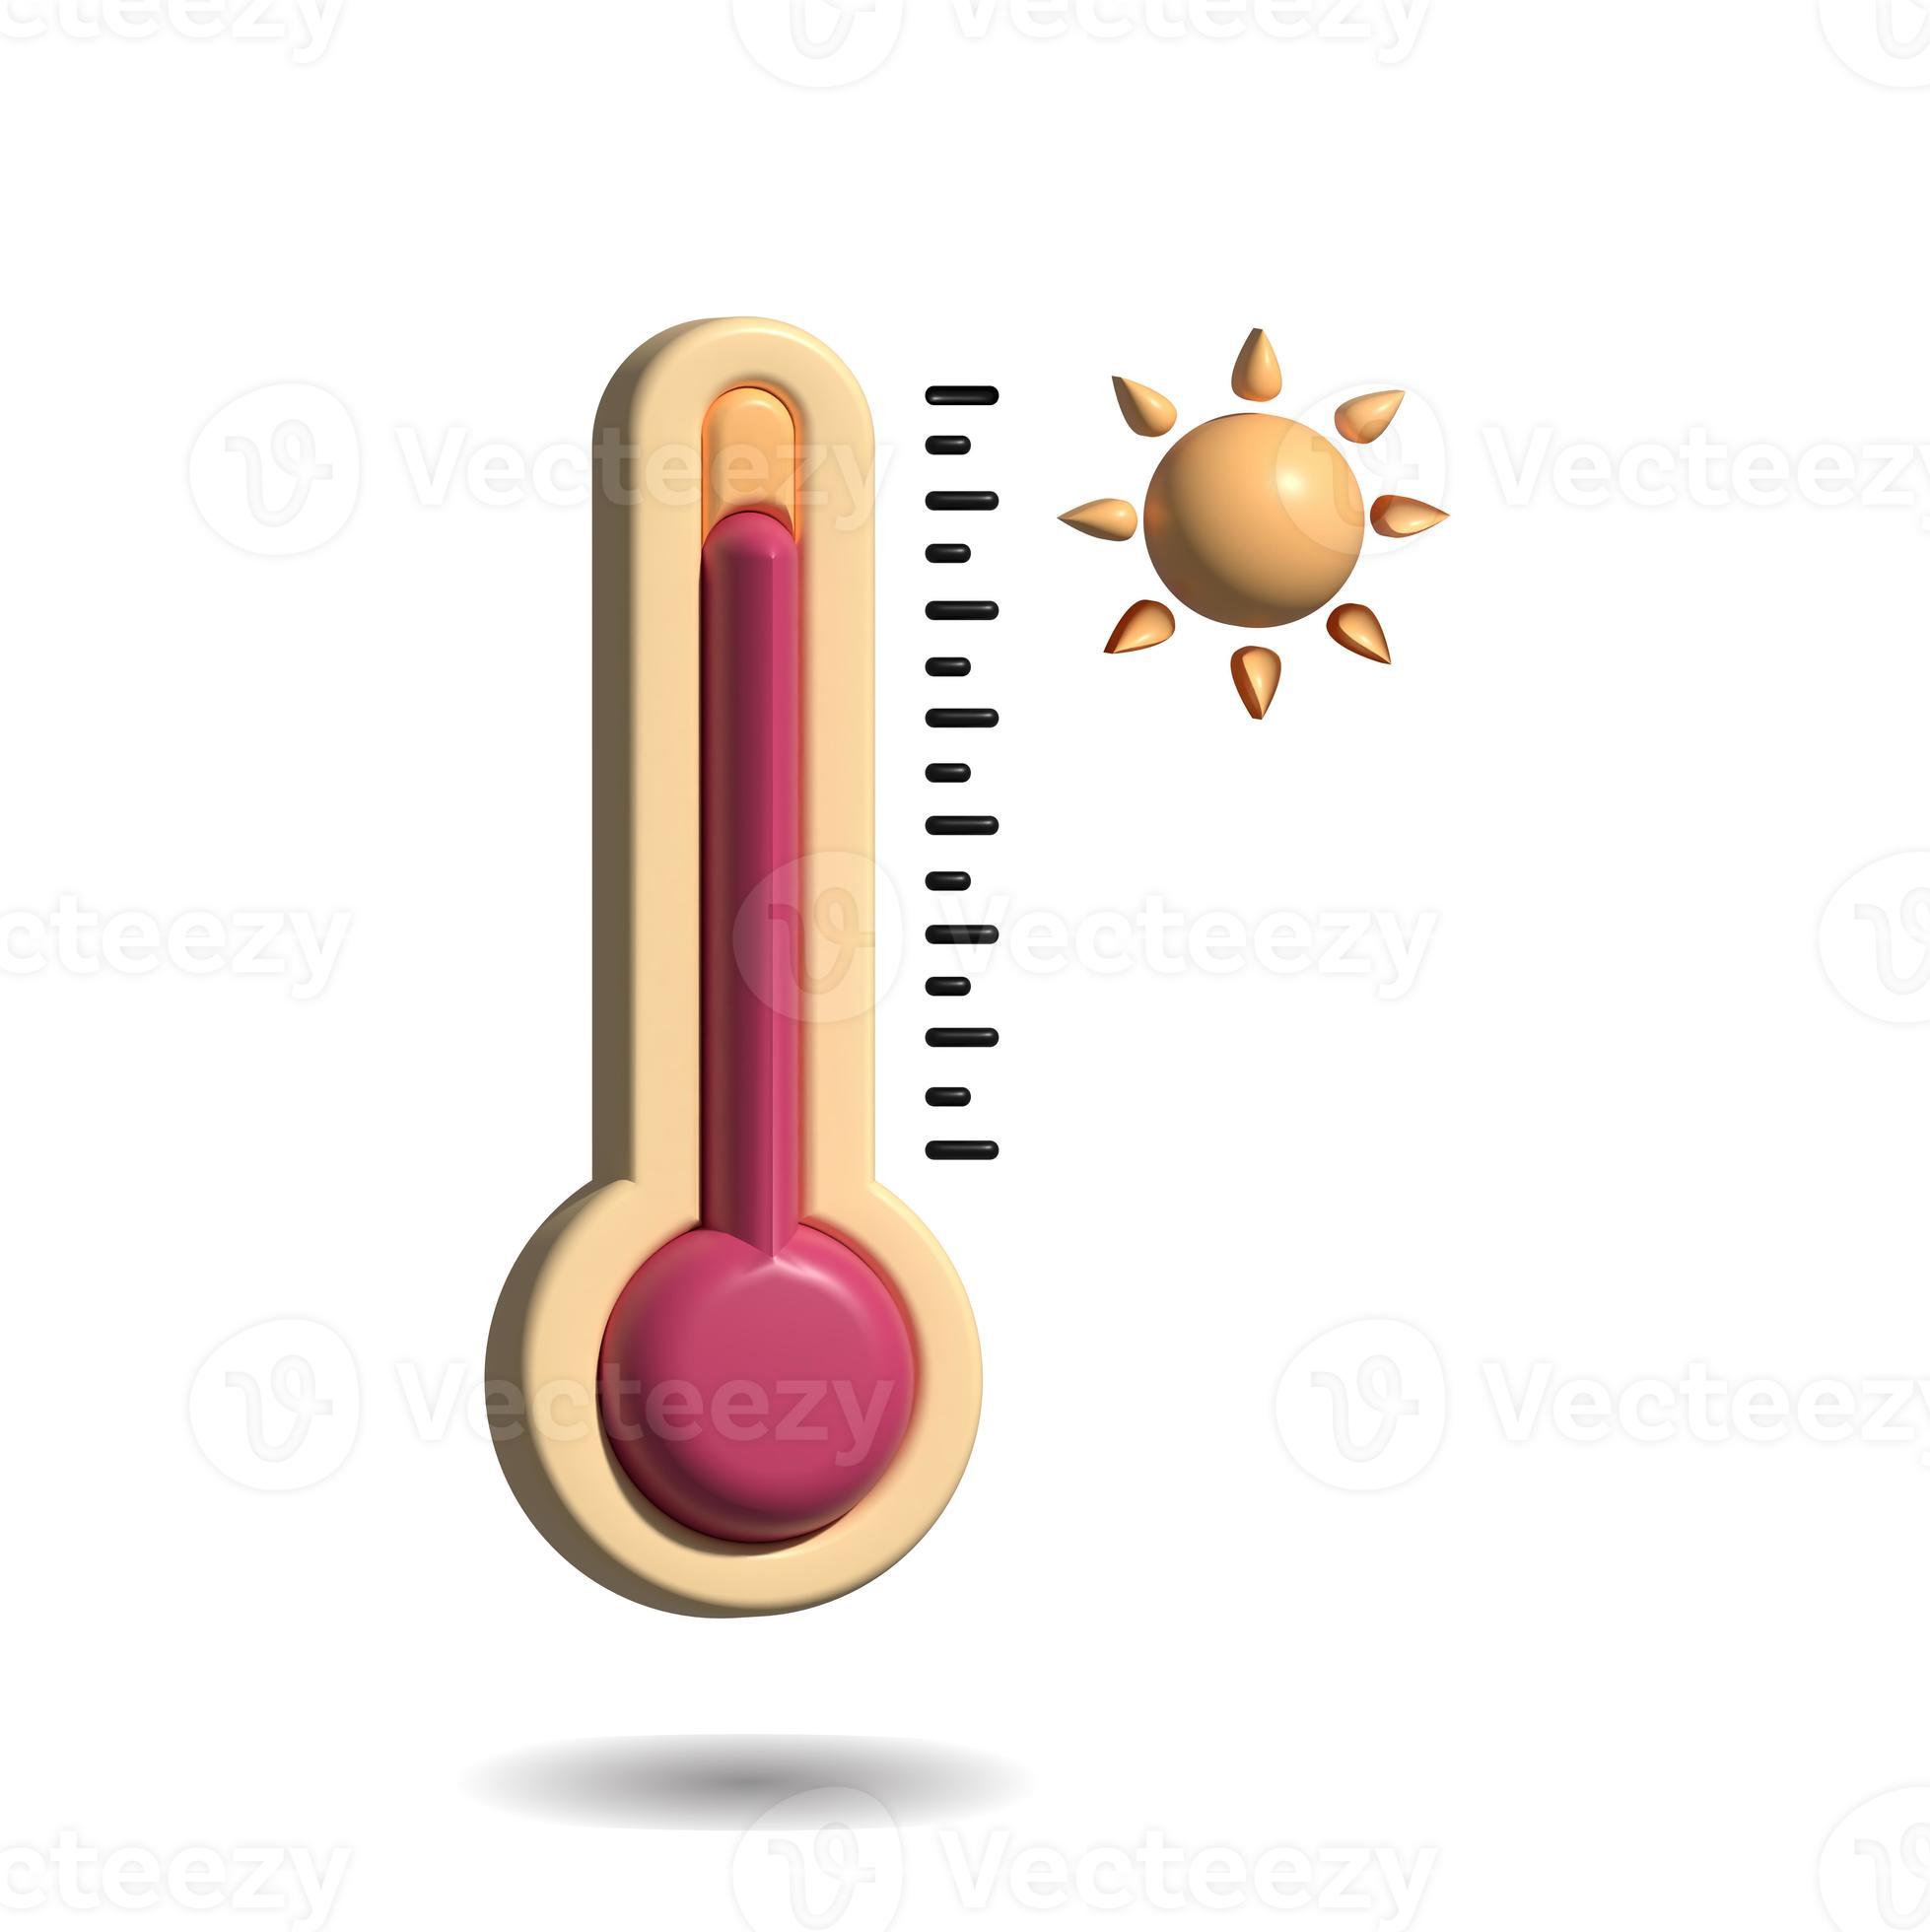 https://static.vecteezy.com/system/resources/previews/017/343/053/large_2x/3d-realistic-thermometer-icon-glass-bulb-with-mercury-measuring-instrument-for-air-temperature-and-body-temperature-isolated-vector-symbol-on-a-white-background-photo.jpg